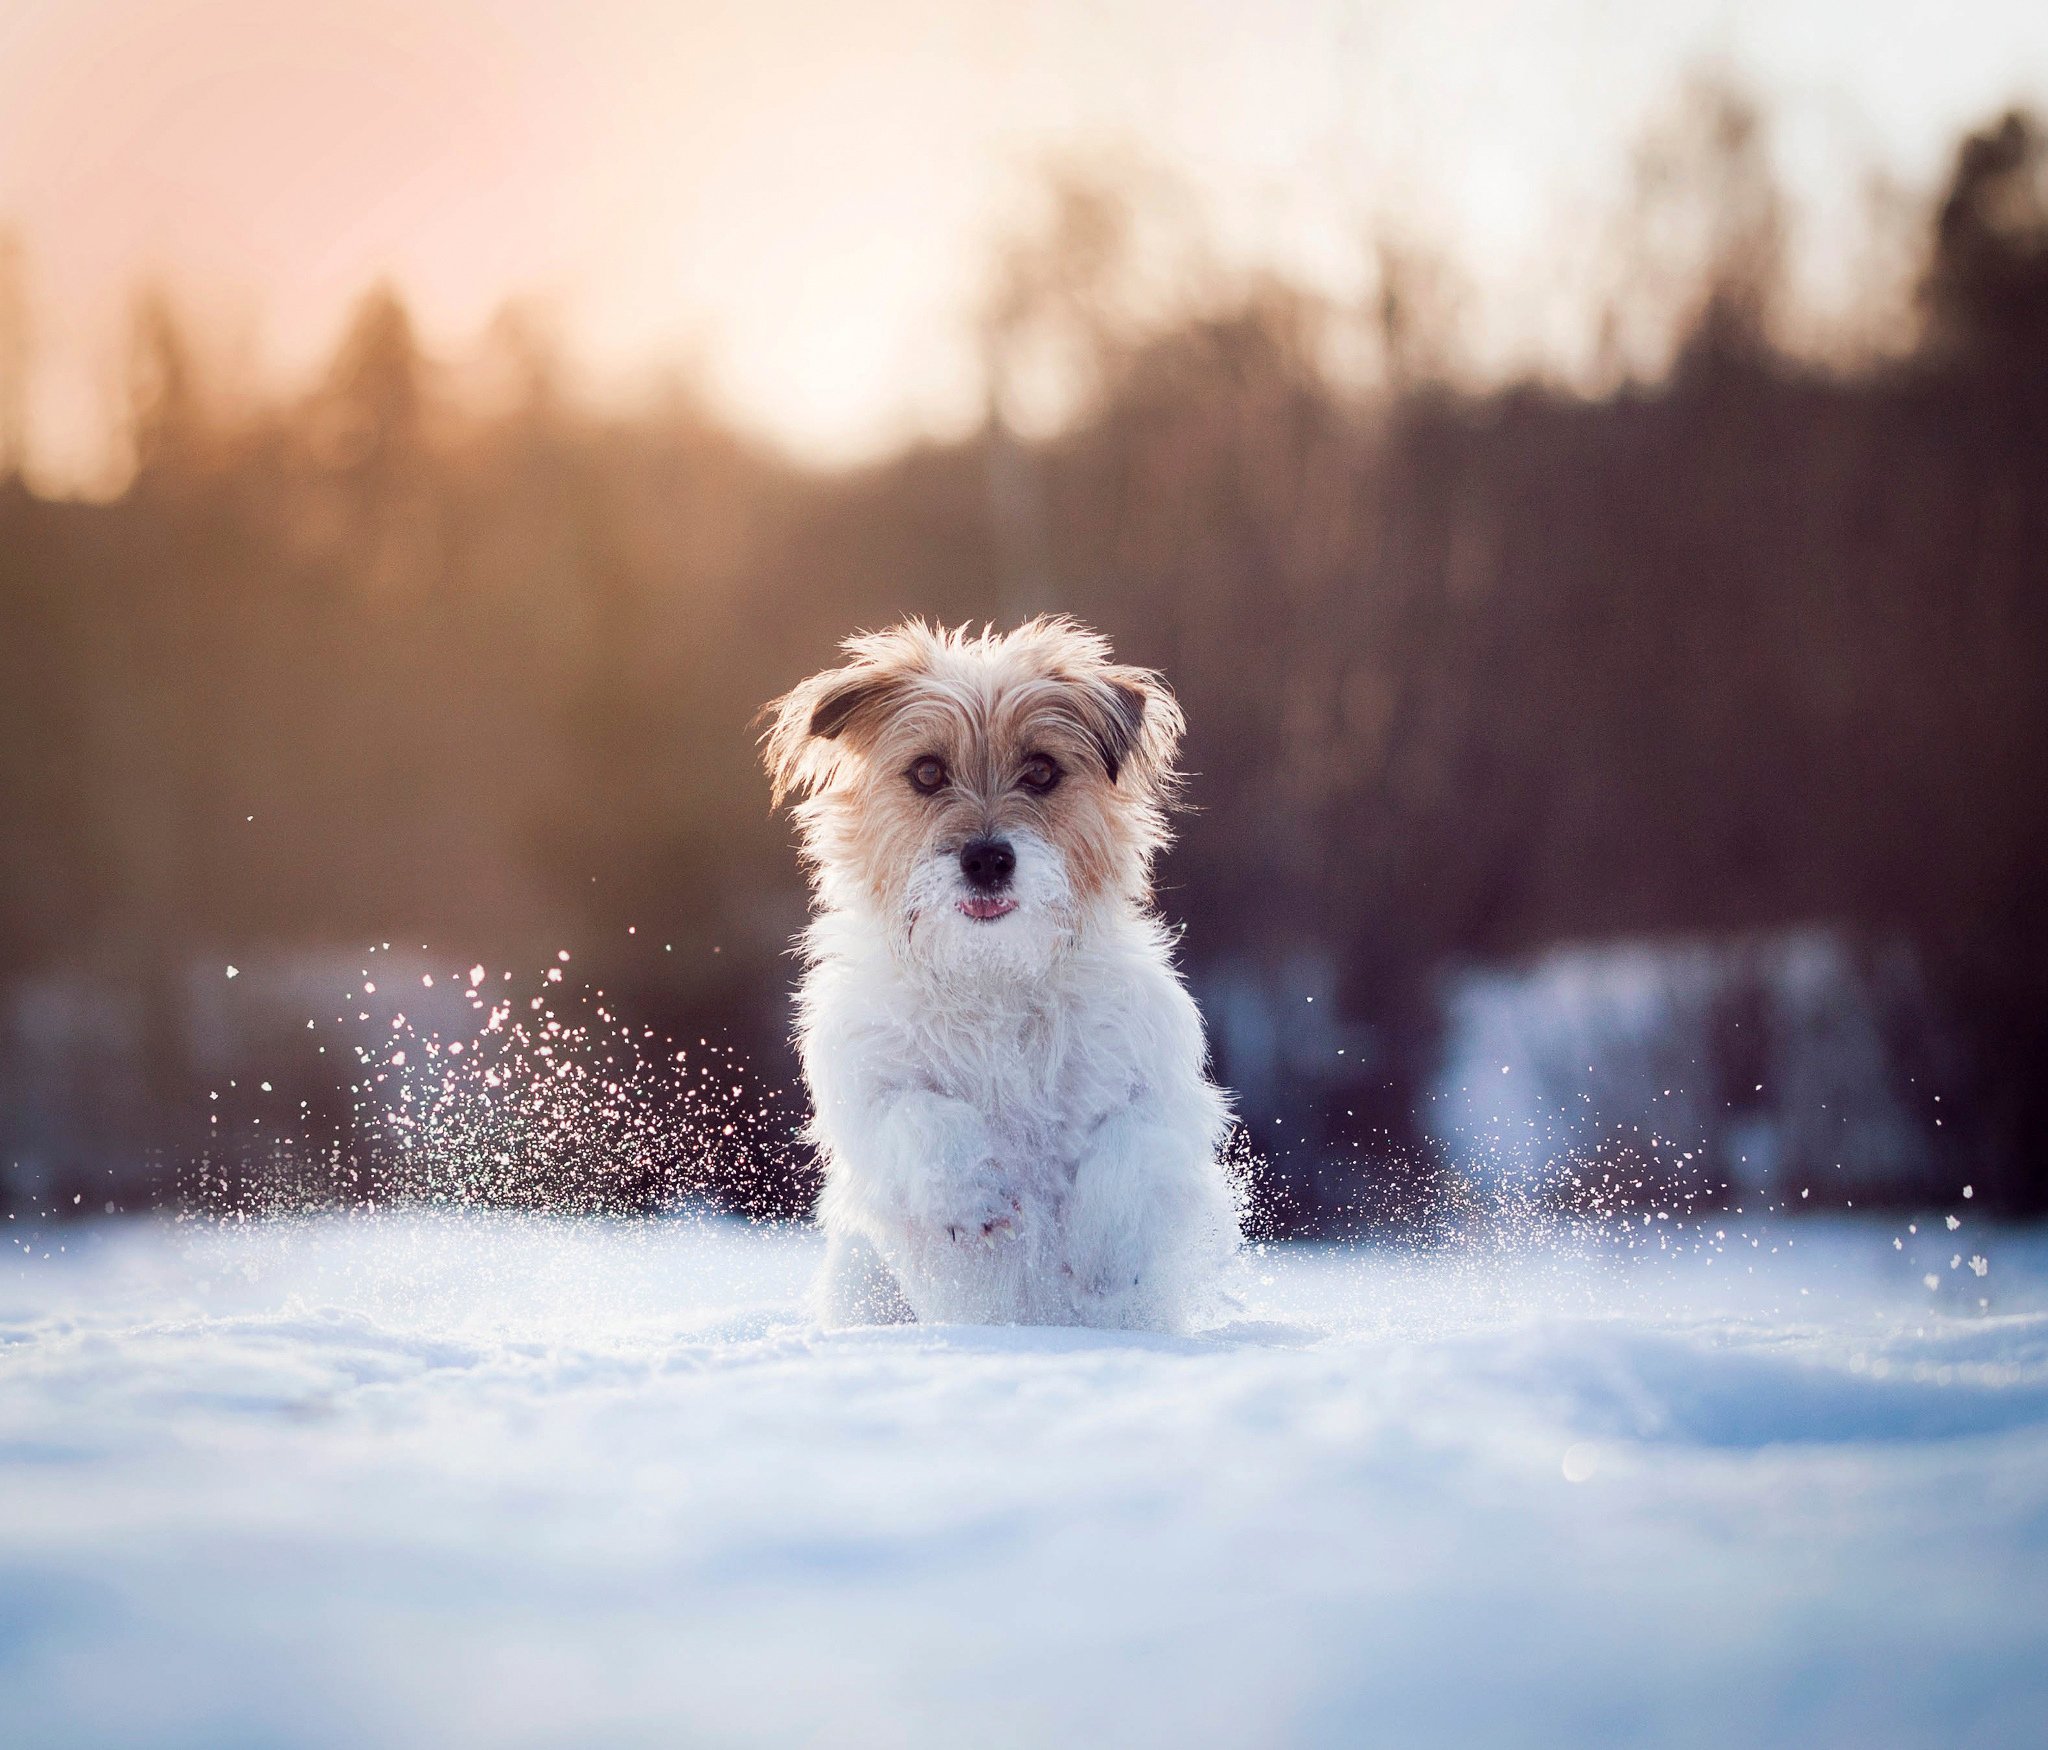 List 102+ Images pictures of dogs in snow Full HD, 2k, 4k